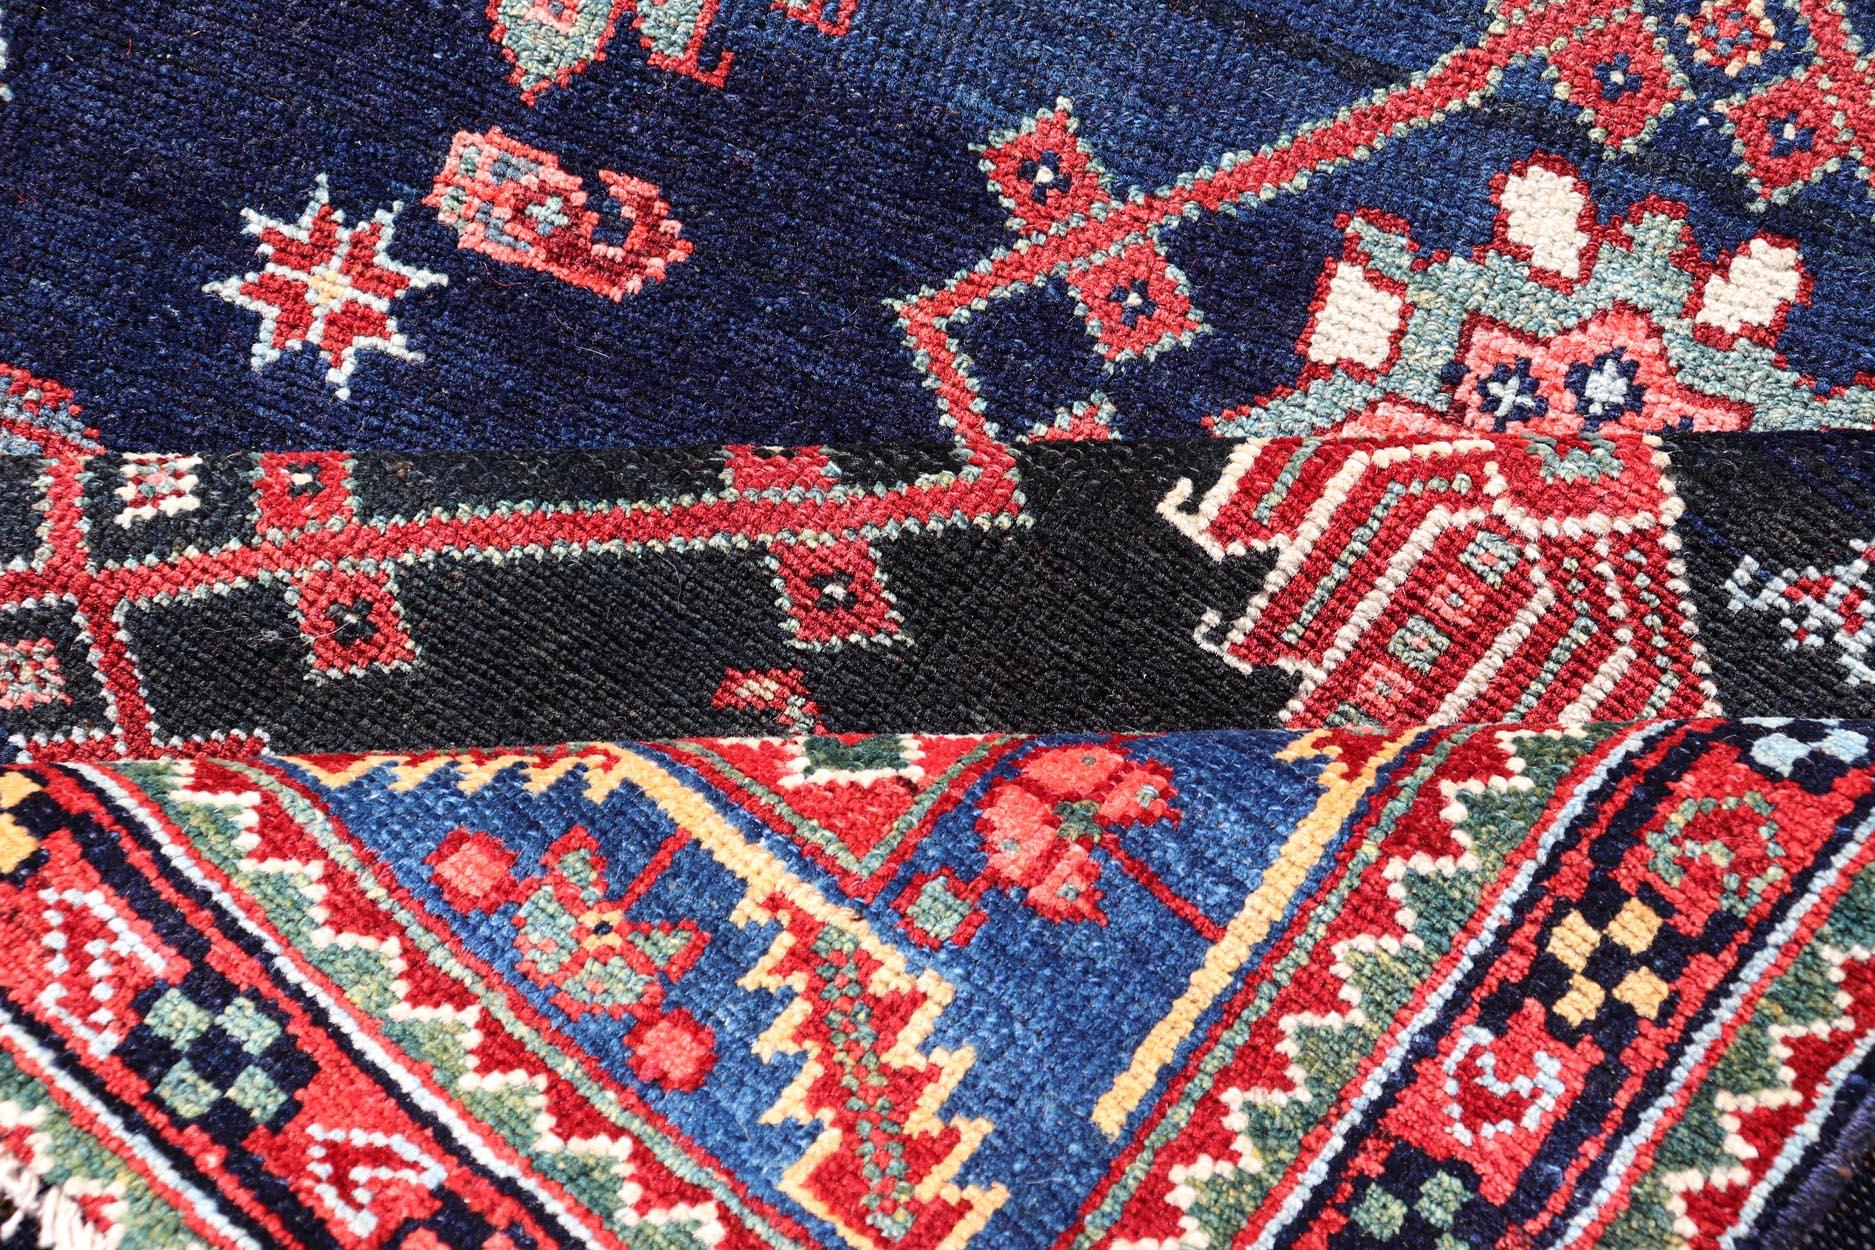 Measures: 4'3 x 16'4 
Antique Persian Malayer Gallery Runner in Blue Background with Multi Colors. Country of origin: Iran; Type: Malayer; Design: All-Over, Keivan Woven Arts: rug EMB-22208-15088; antique Persian Gallery Hamadan 

This 1930's